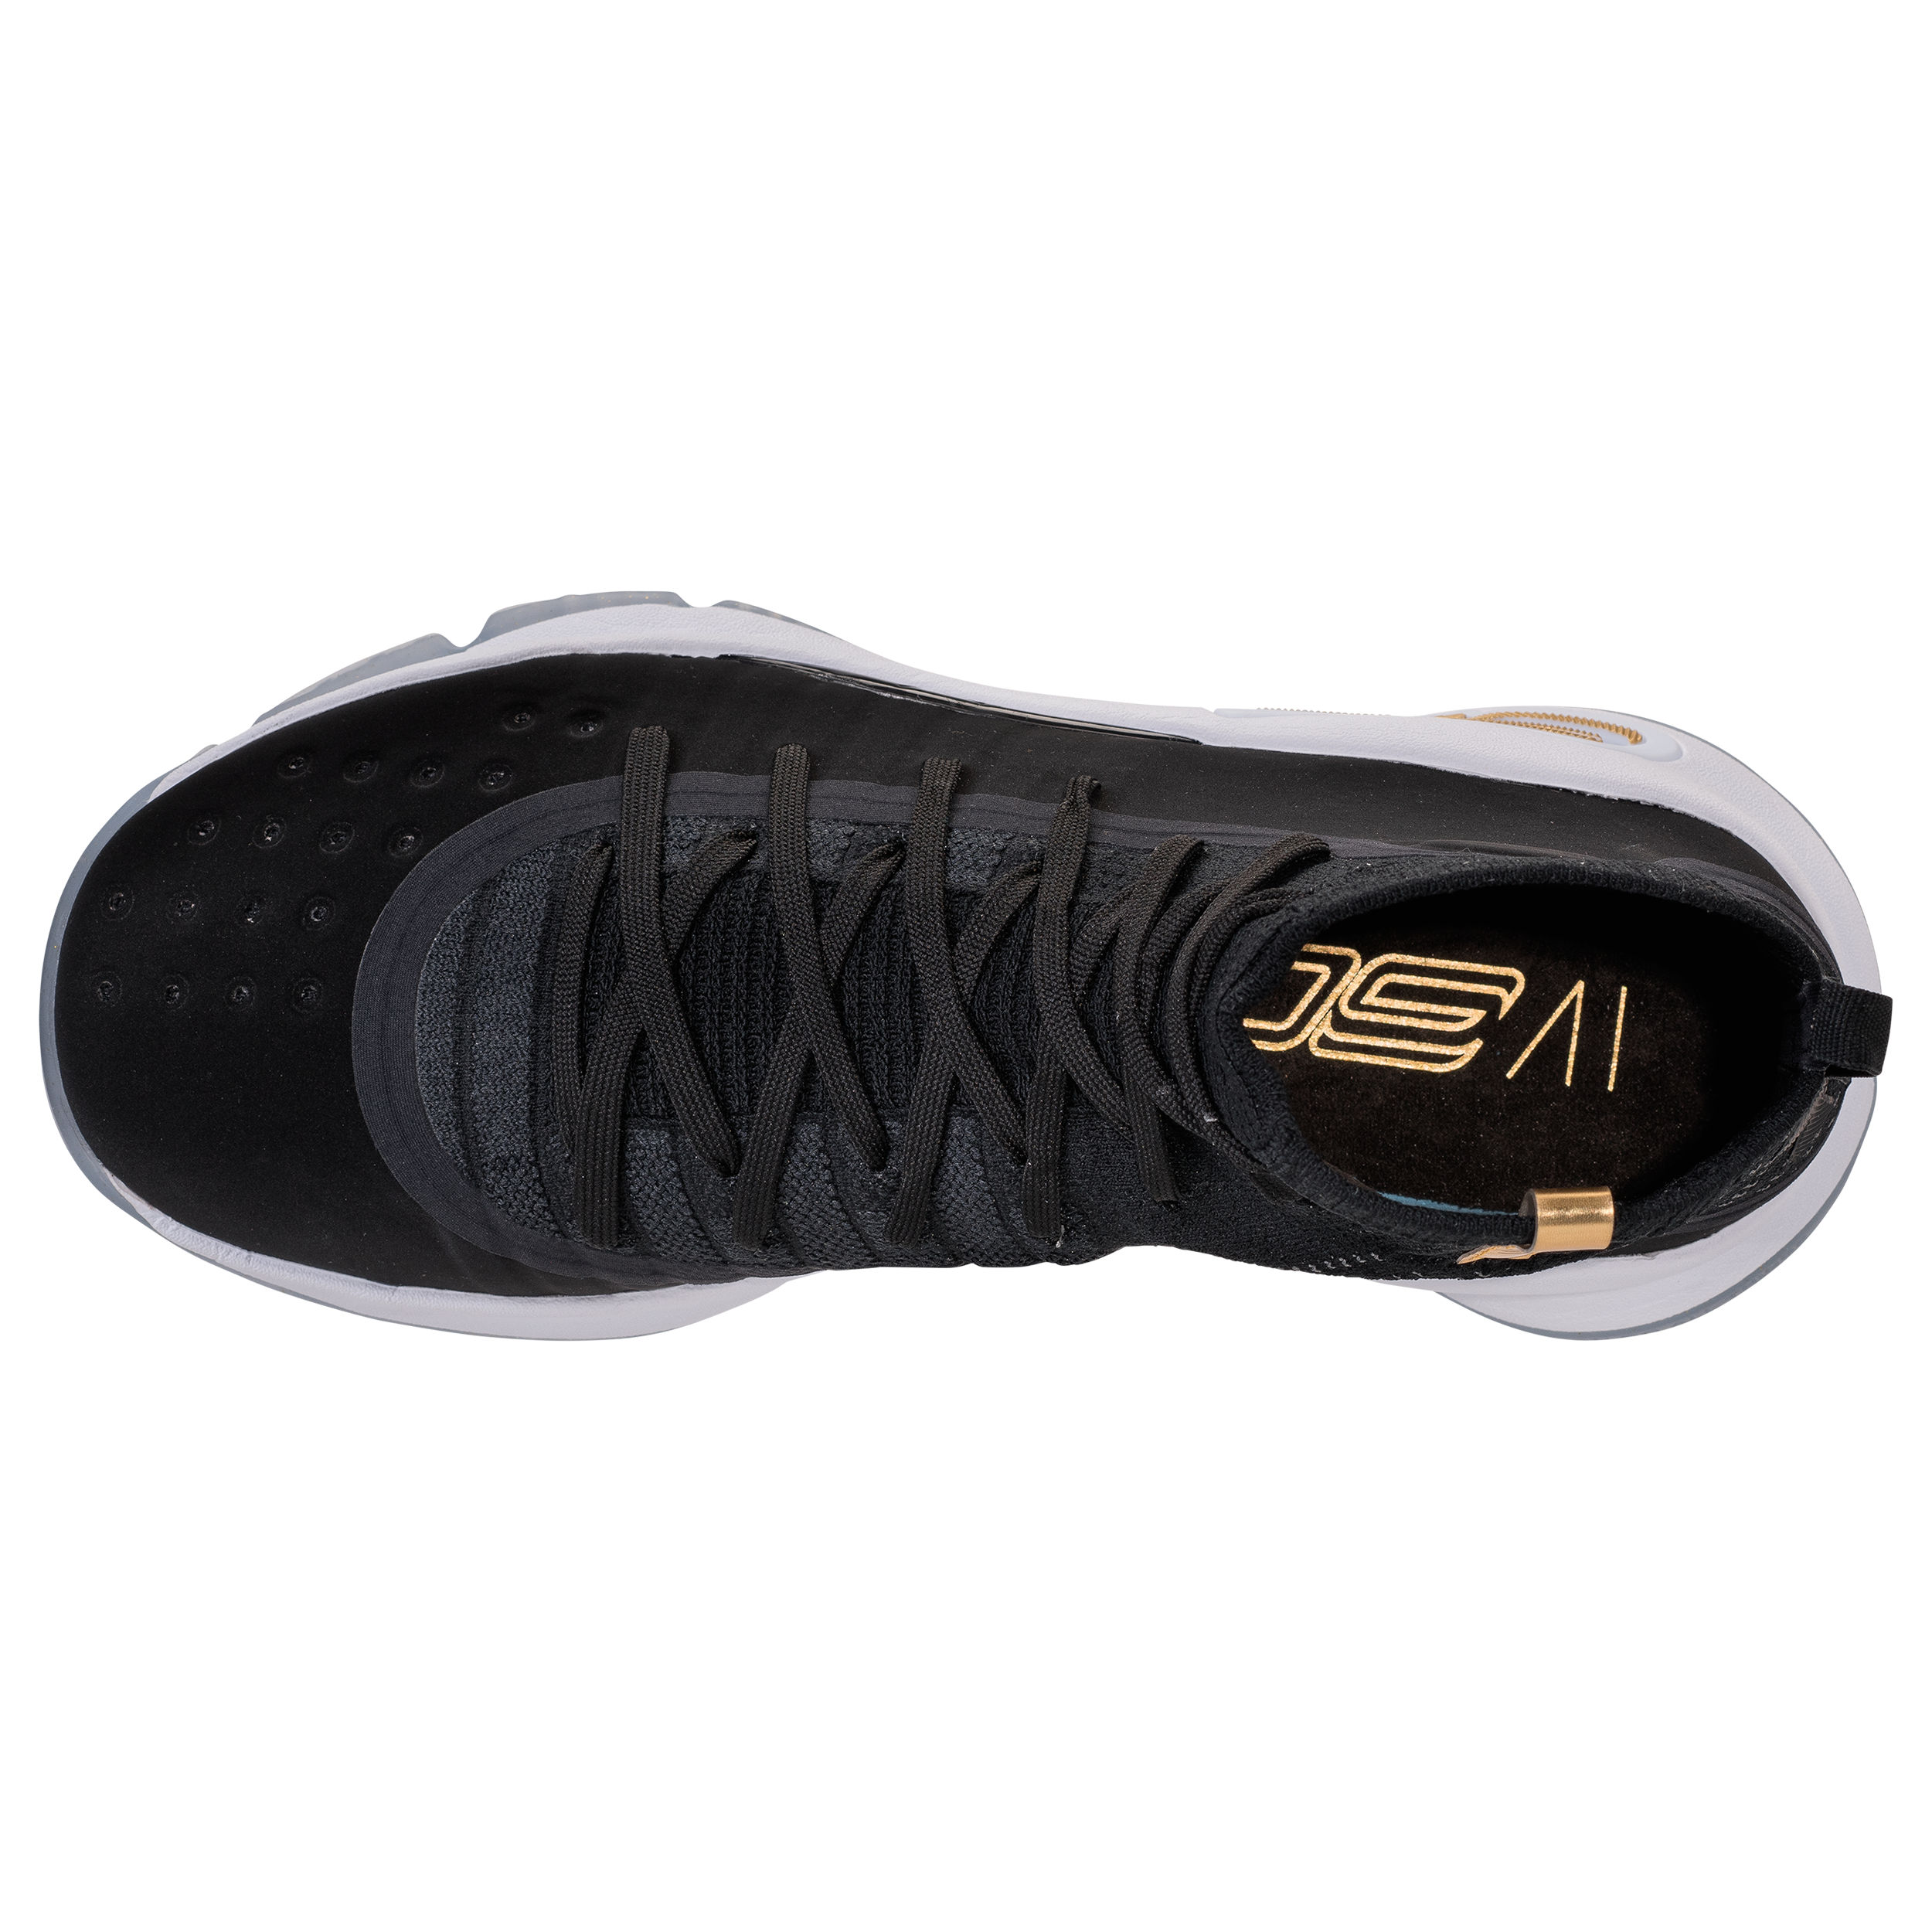 Under armour curry 4 black gold 5